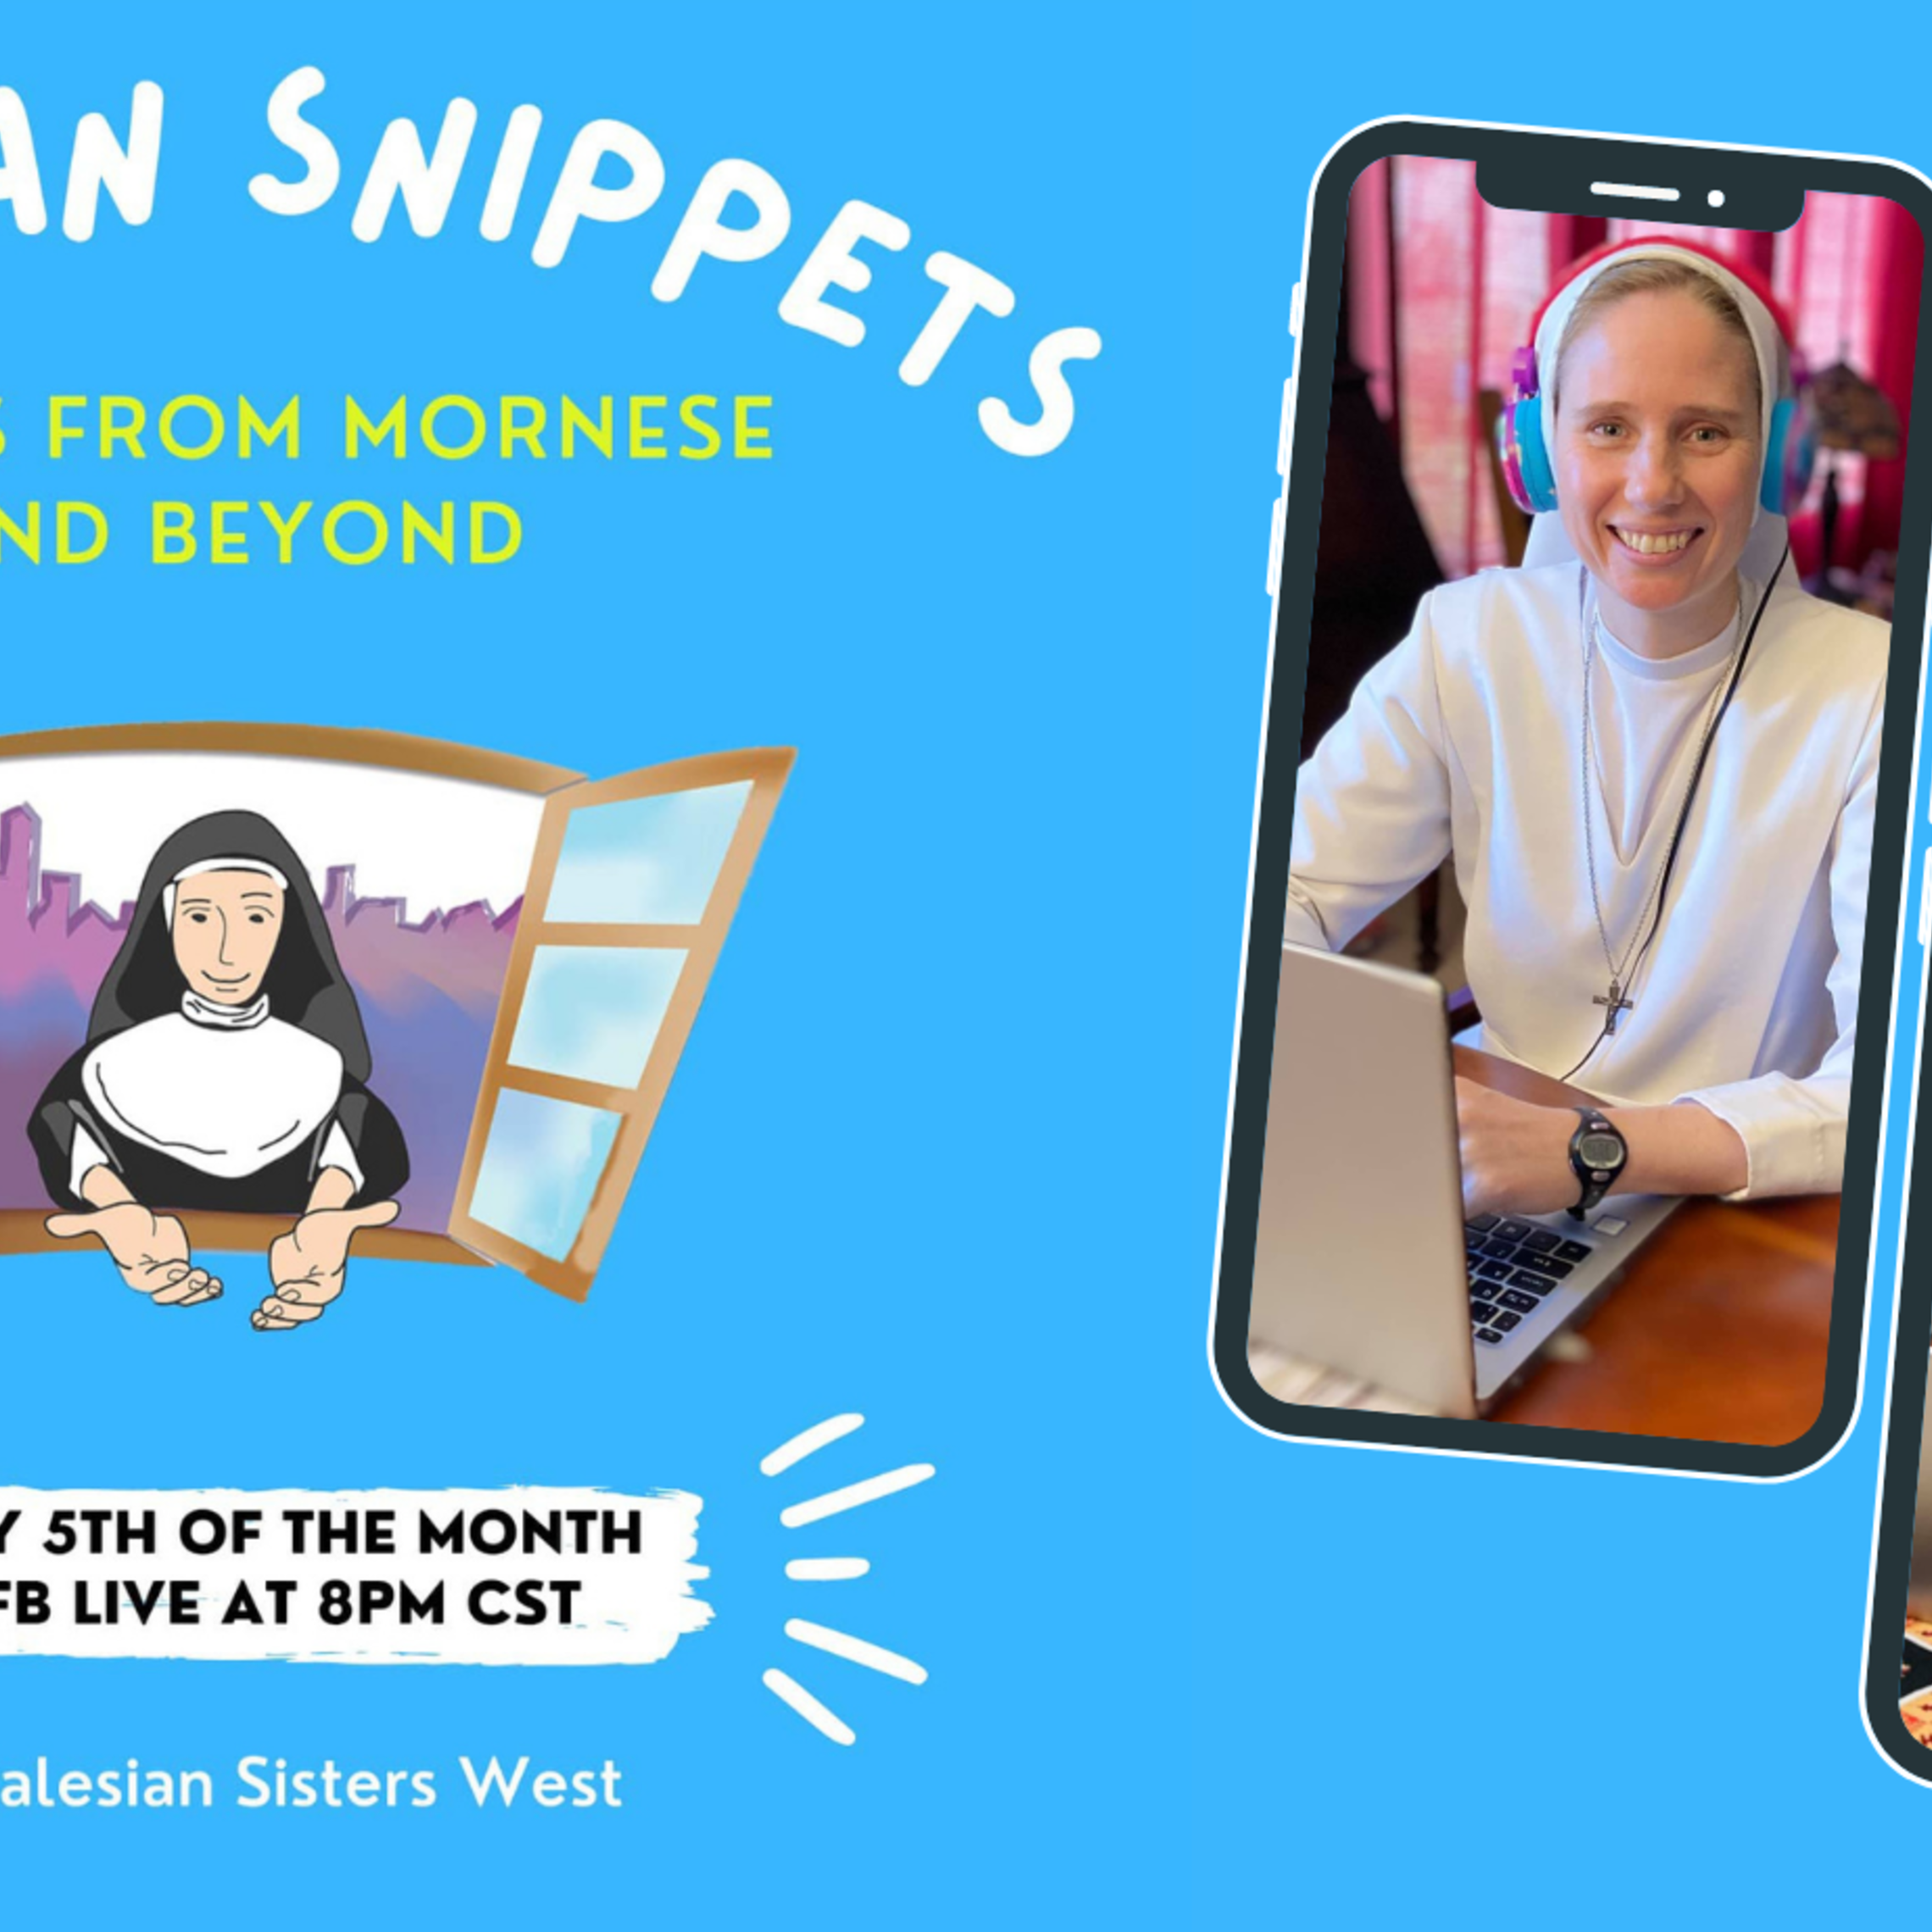 Salesian Snippets on Facebook Live!